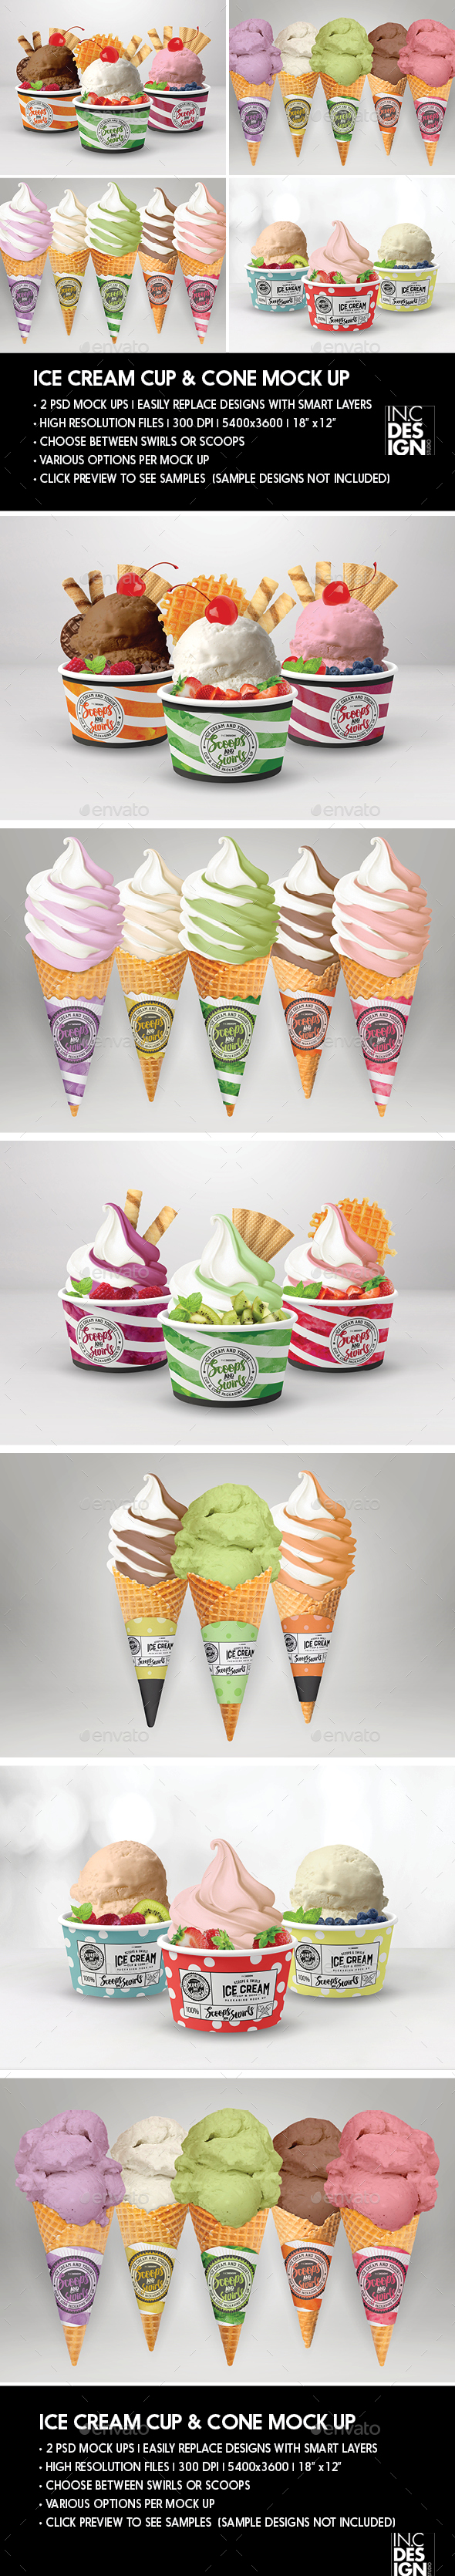 Packaging Mock Up Ice Cream / Yogurt Cup / Cone by ina717 | GraphicRiver